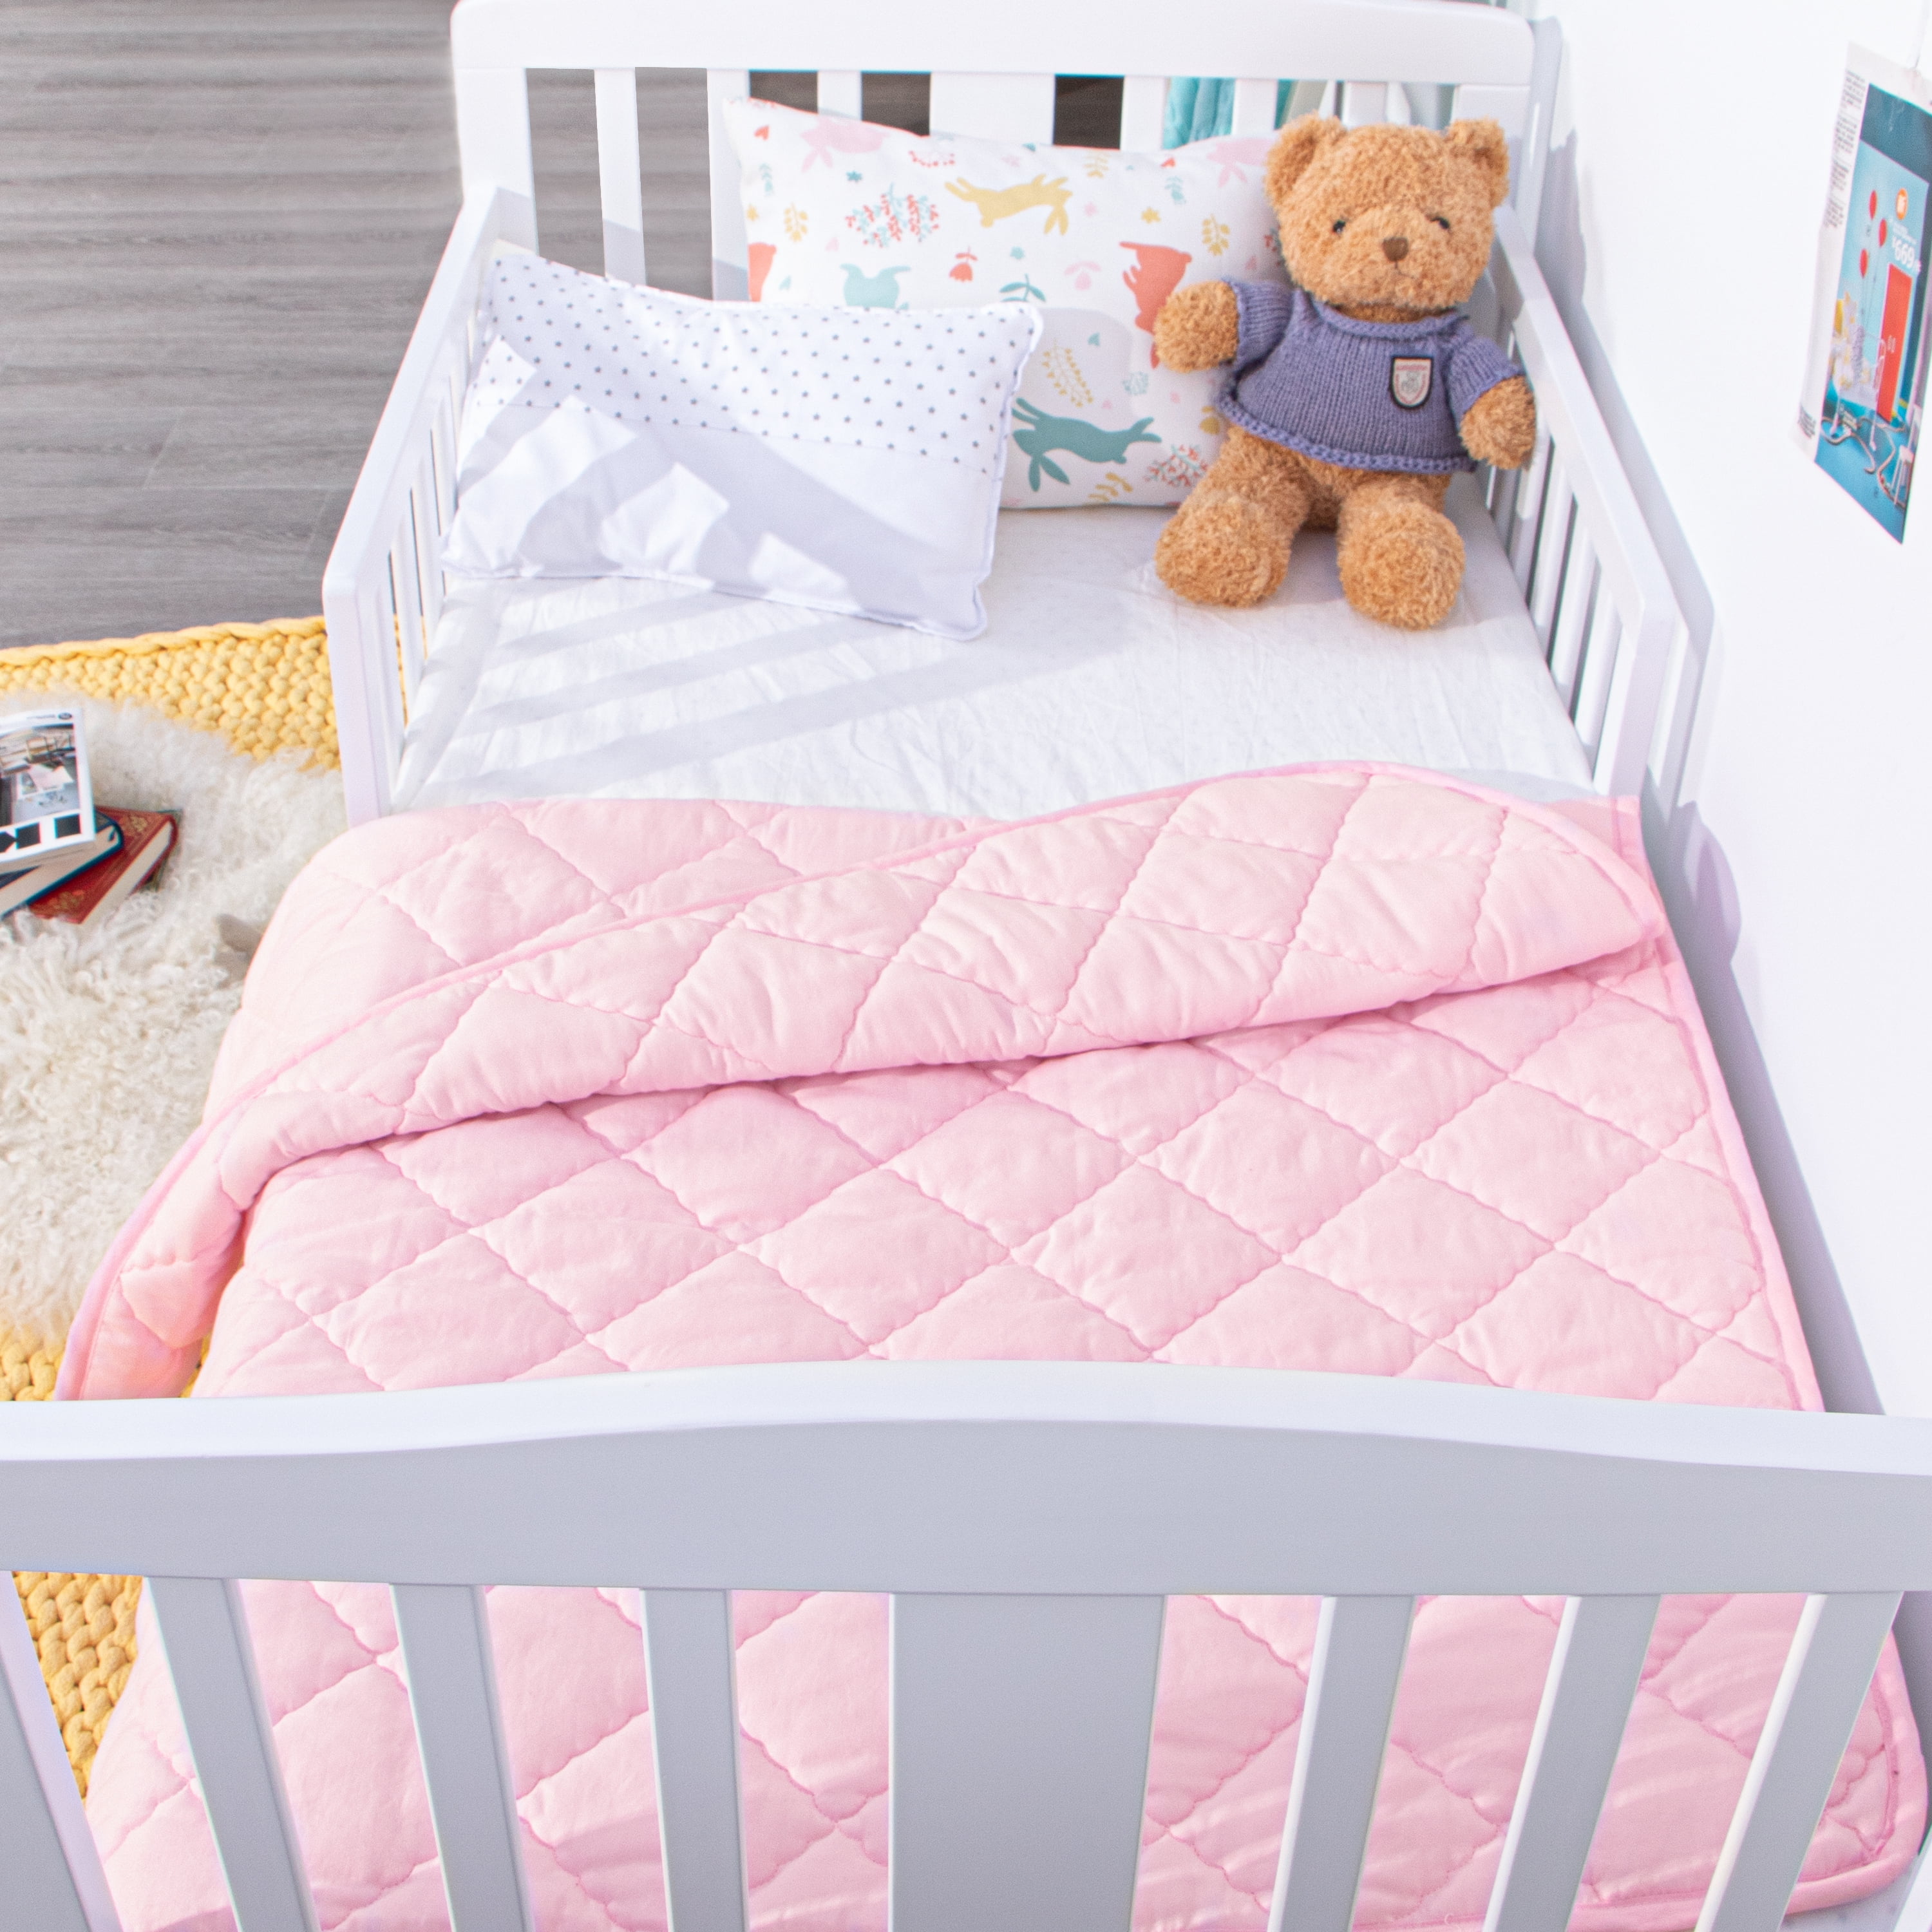 Lightweight and Warm Solid Color Baby Crib Quilted Blanket 39 x 47 inches NTBAY Down Alternative Toddler Comforter Pink 